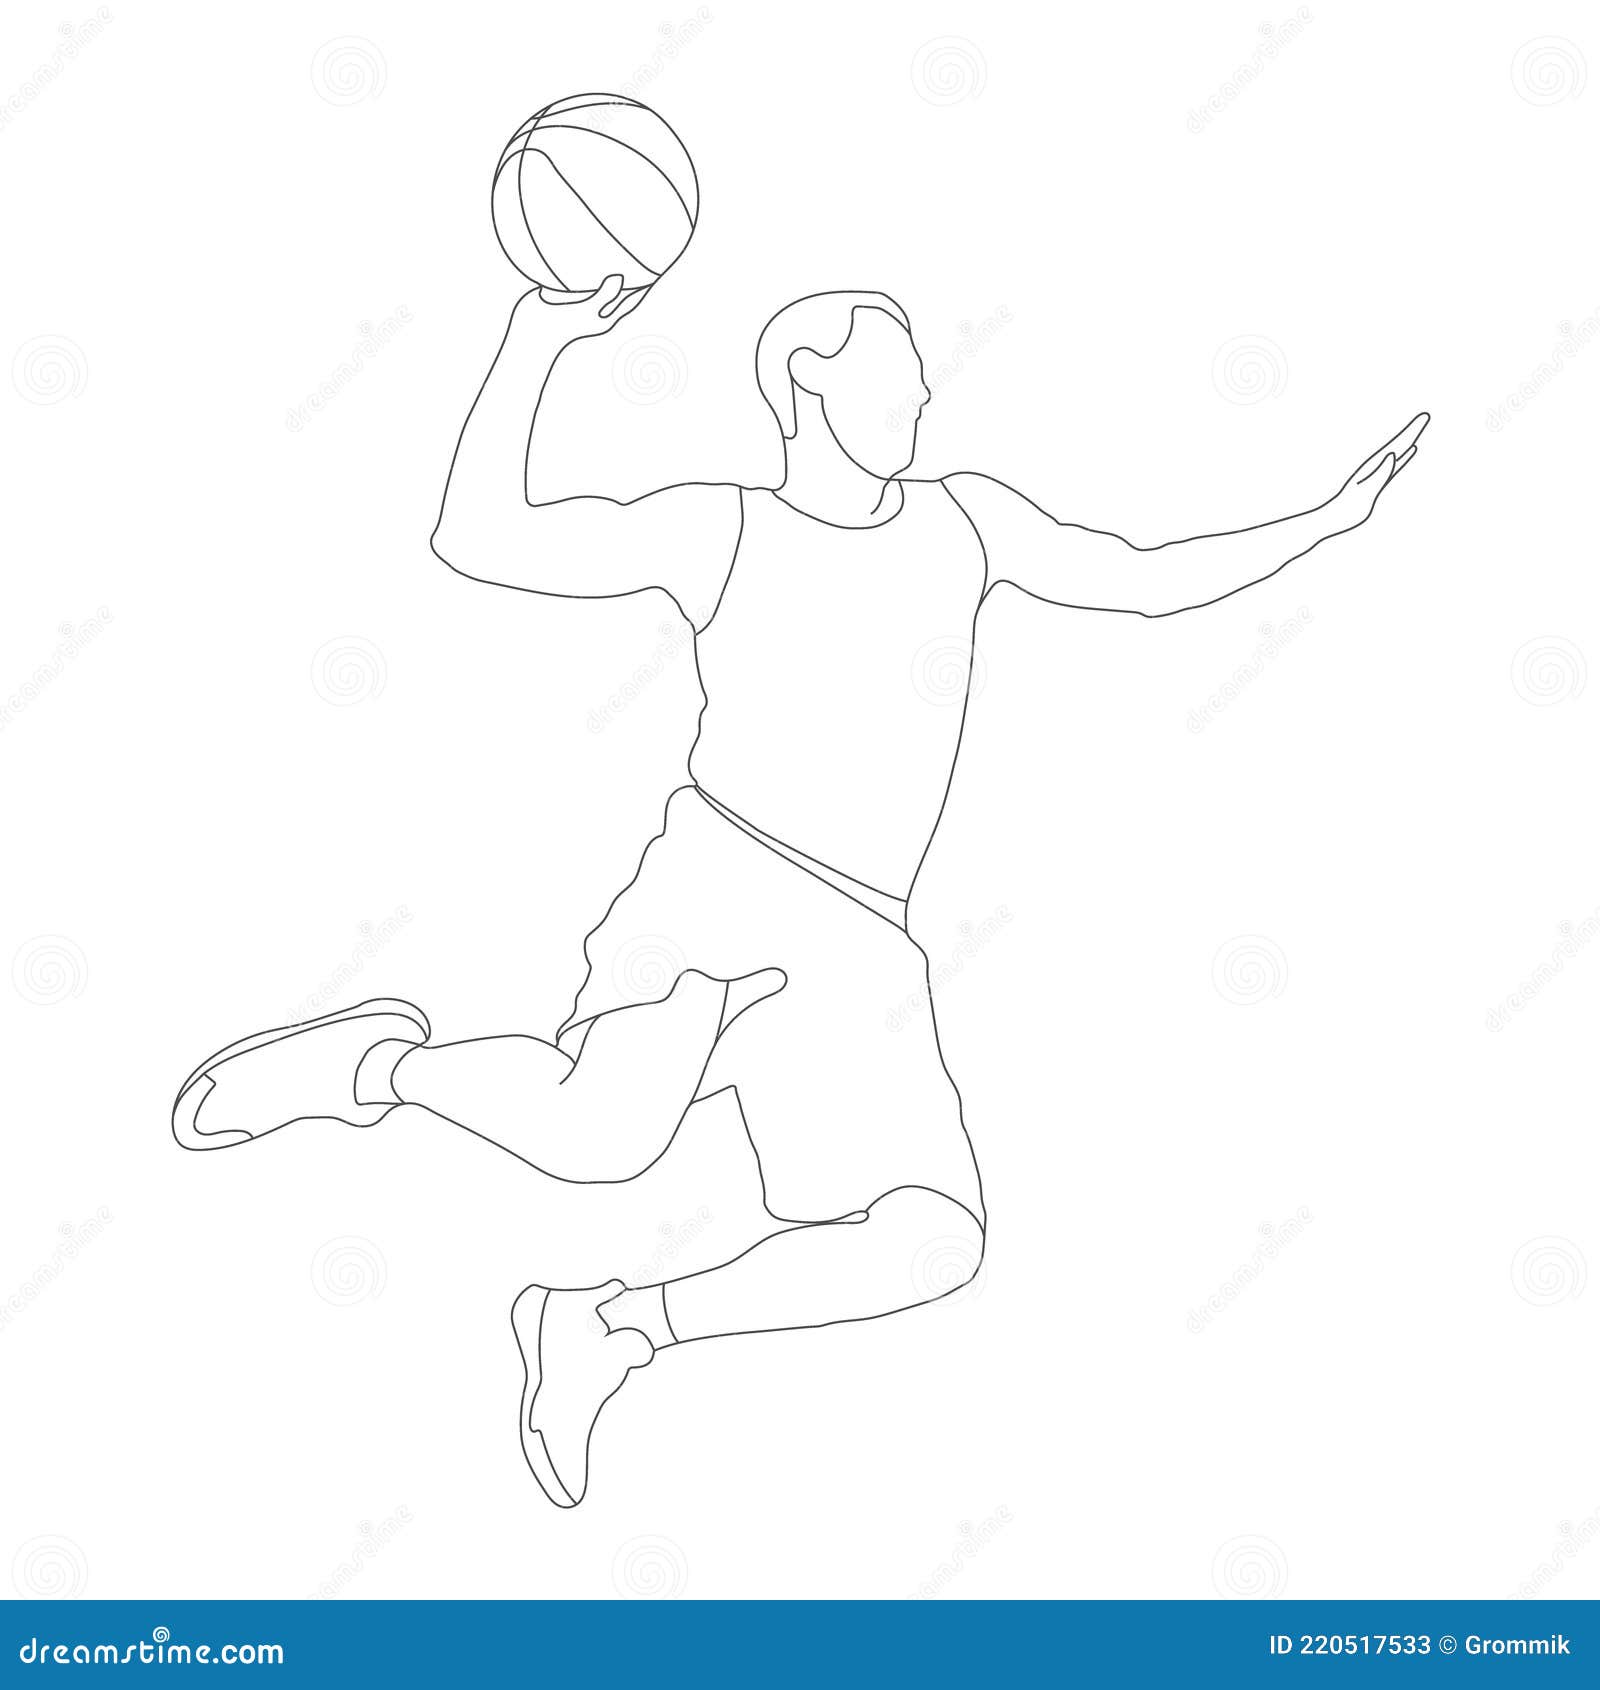 Basketball. Empty Contour Silhouette of a Basketball Player with a Ball ...